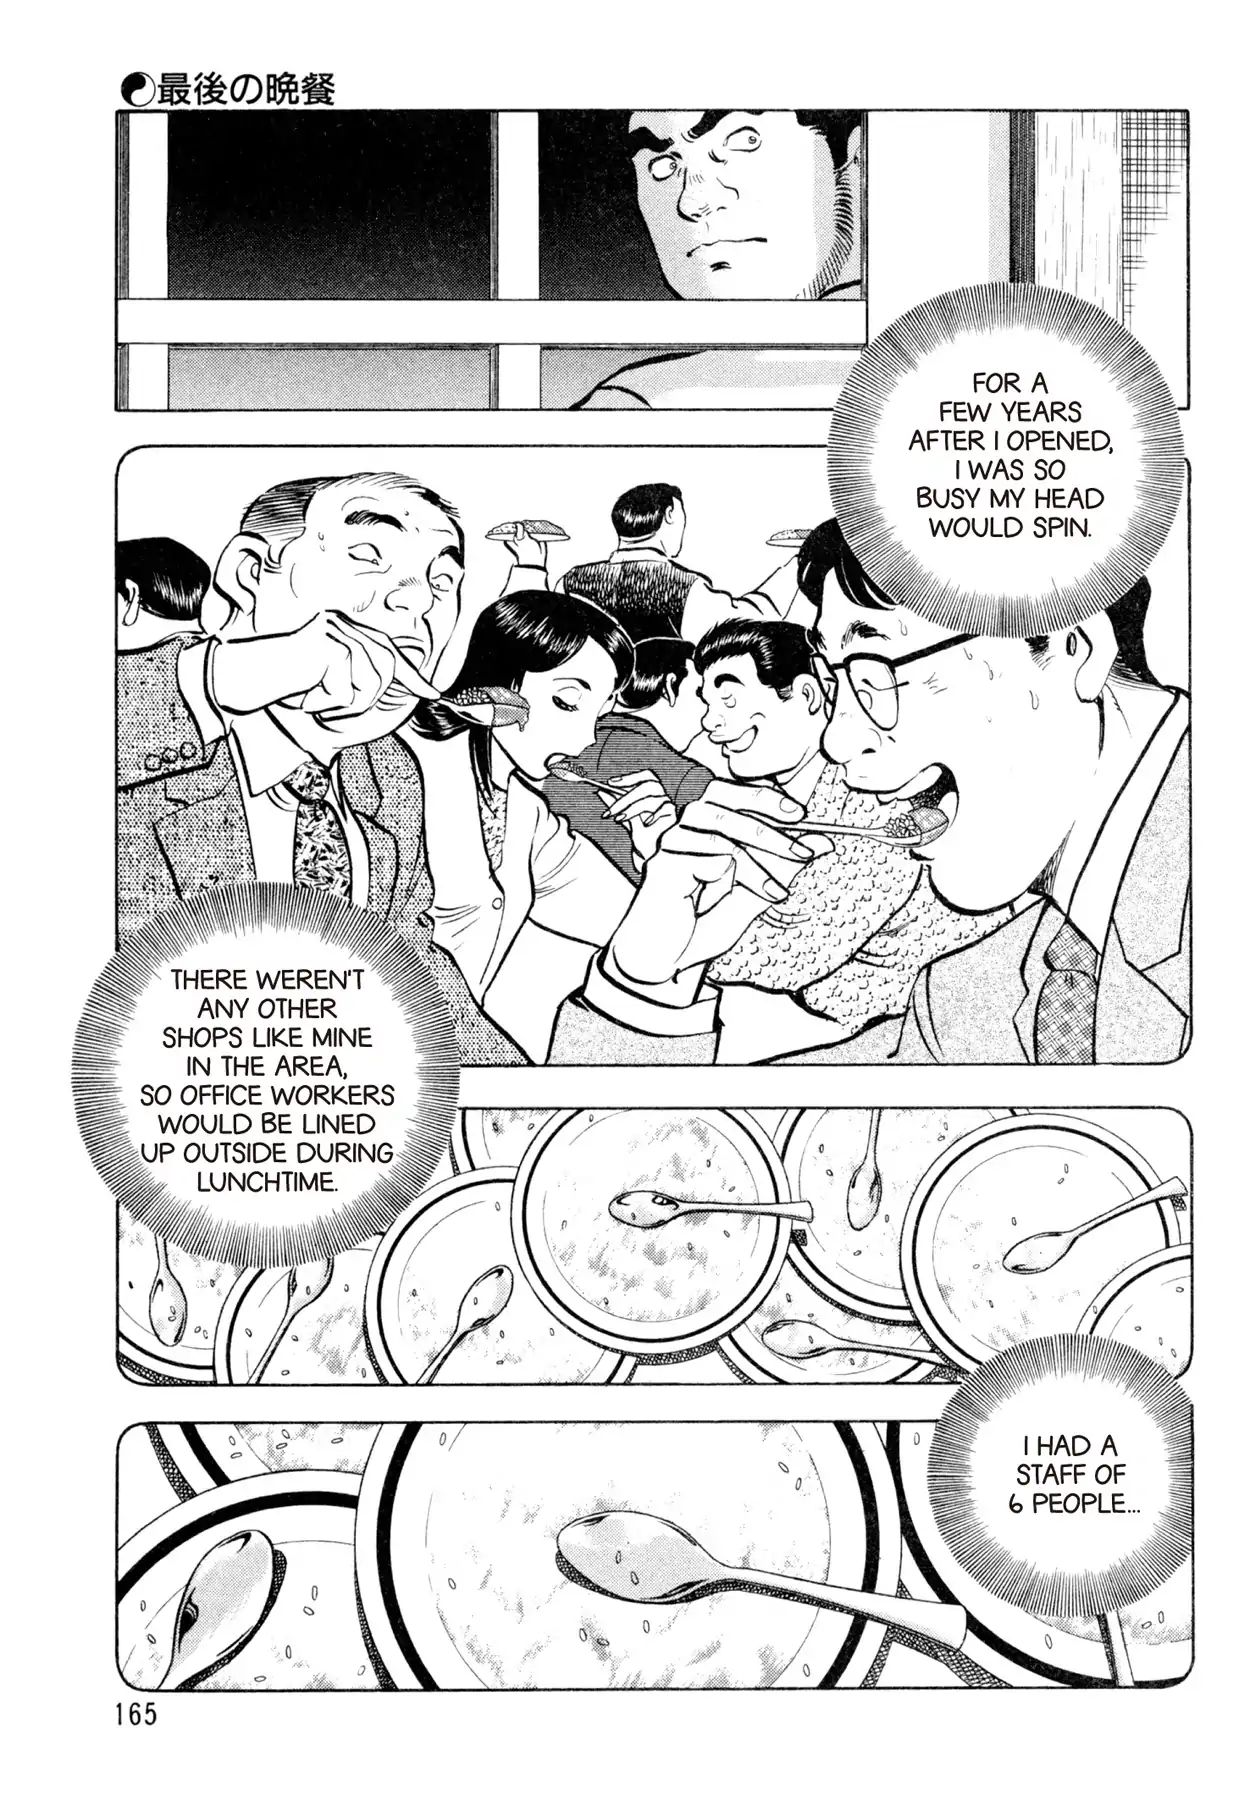 Shoku King VOL.7 CHAPTER 60: THE LAST SUPPER